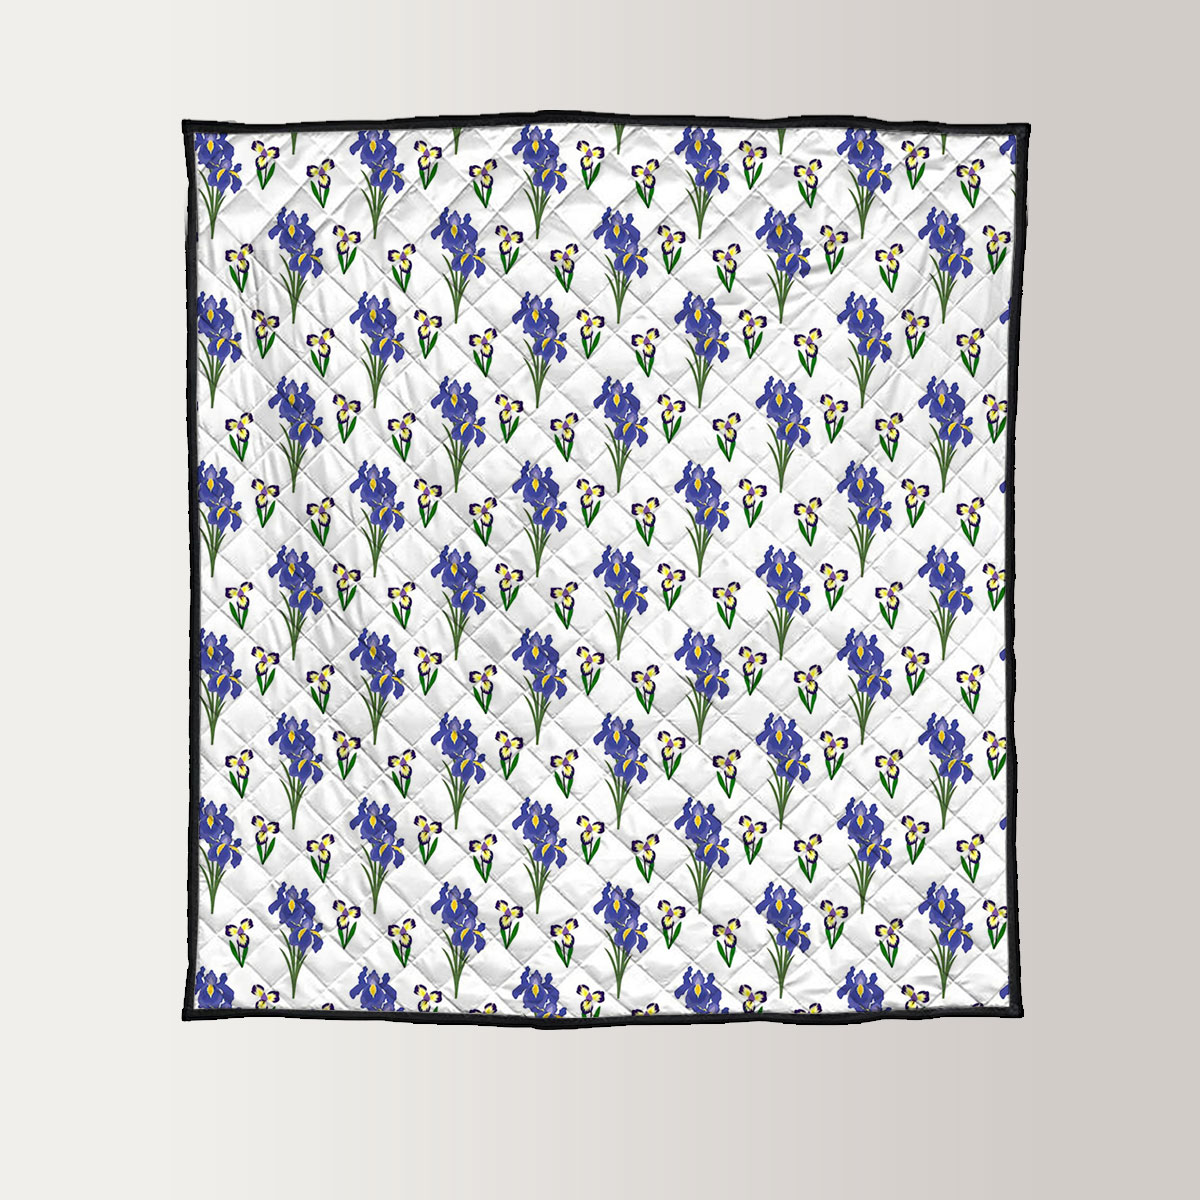 Iris Flower And Leaf Seamless Pattern Quilt